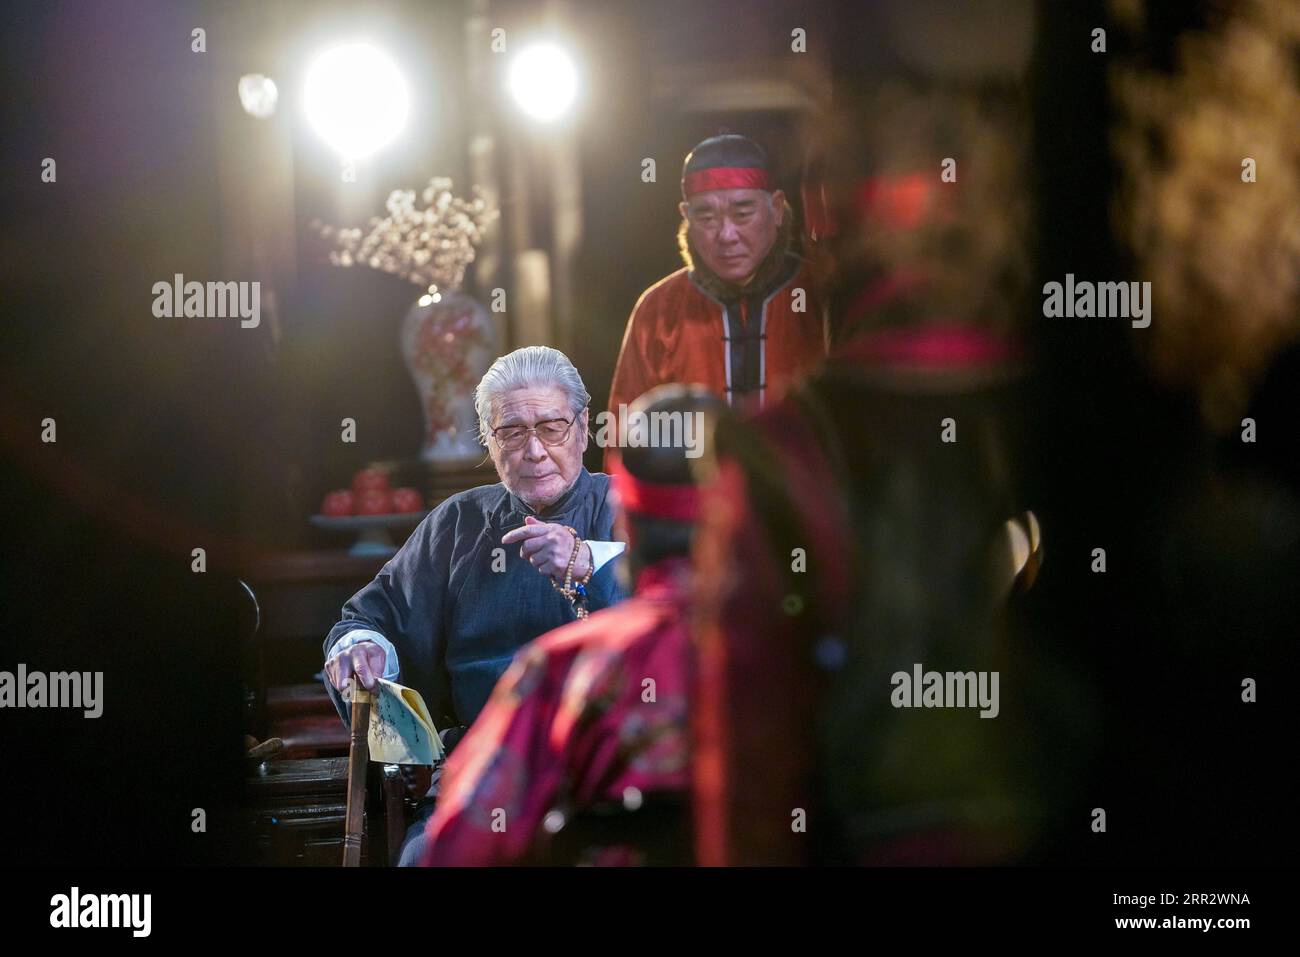 201017 -- BEIJING, Oct. 17, 2020 -- Actor Lan Tianye, 93, takes part in the rehearsal of drama Family in Beijing, capital of China, Oct. 13, 2020. To commemorate the 110th anniversary of the birth of renowned playwright Cao Yu 1910-1996, the Beijing People s Art Theatre is restaging one of his classic works Family from Oct. 15 to 25. Photo by /Xinhua XINHUA PHOTOS OF THE DAY ShixChunyang PUBLICATIONxNOTxINxCHN Stock Photo